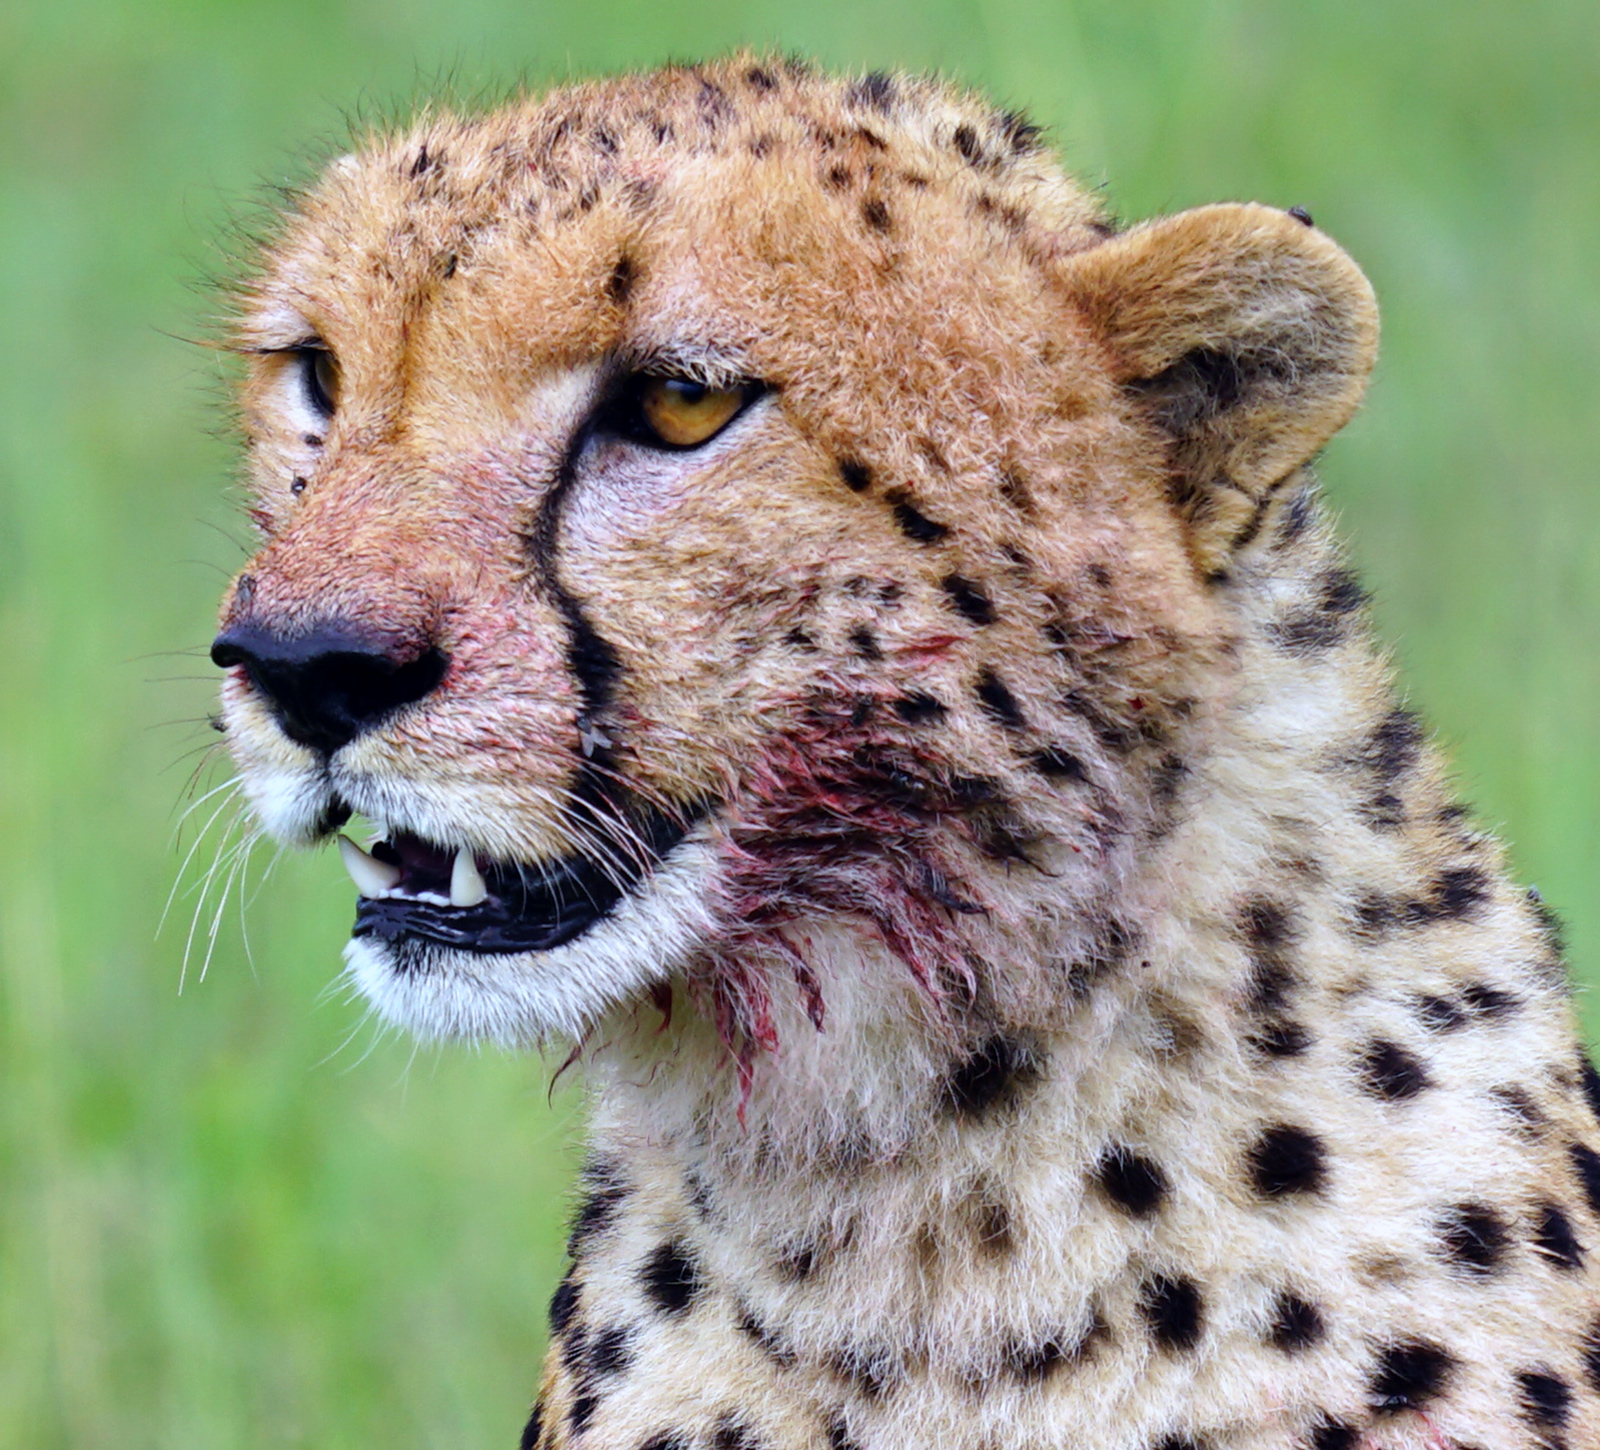 This cheetah is not messing around